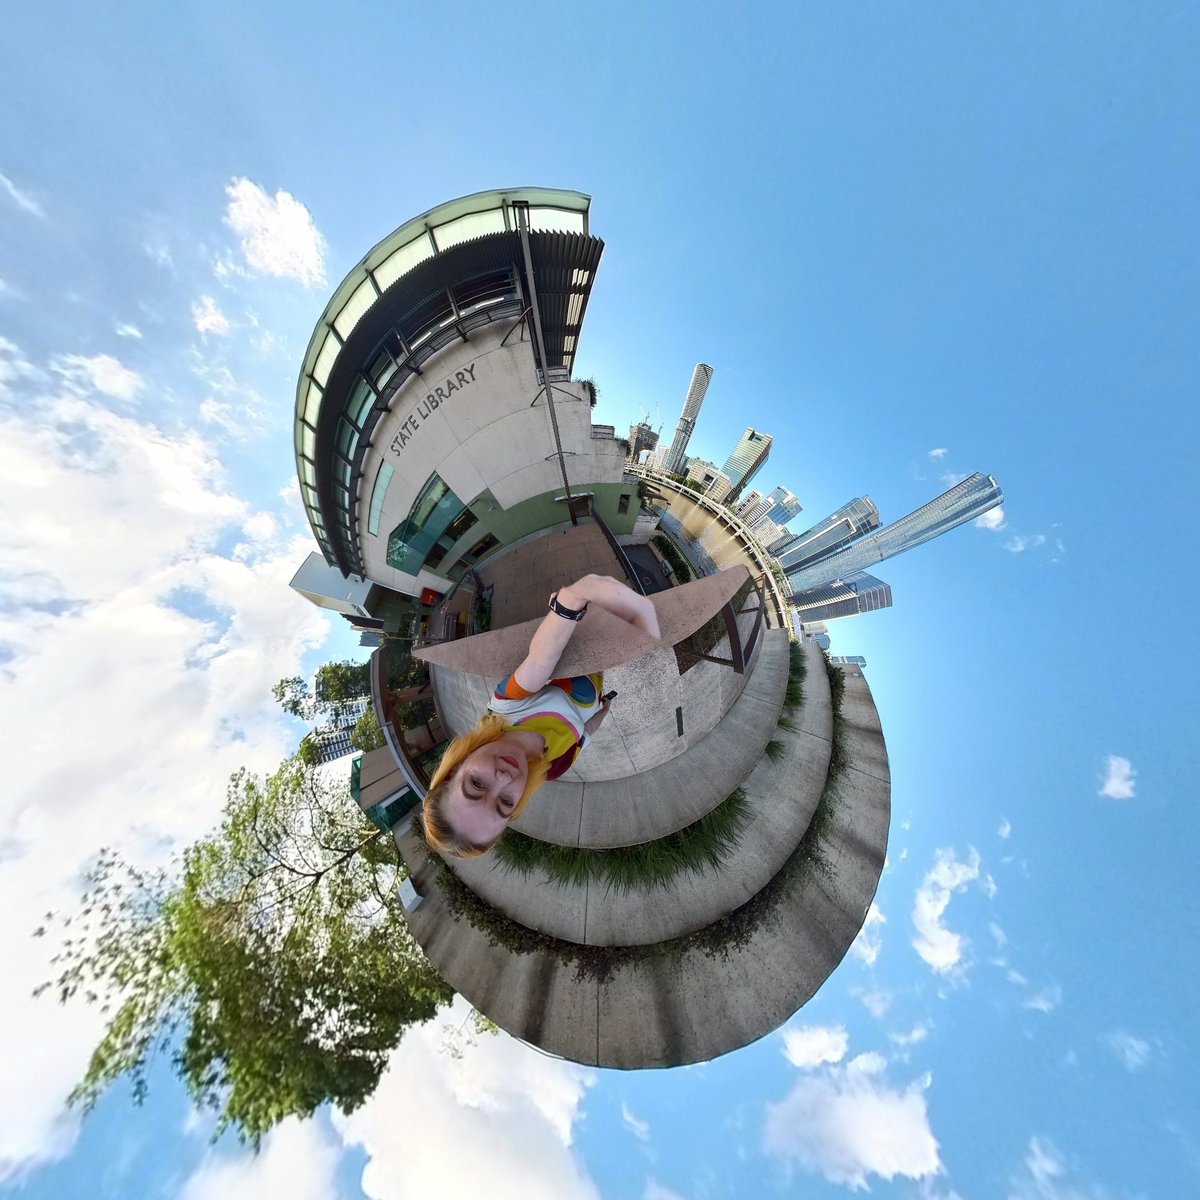 Join us at The Edge on 22 May from 6pm for an Intro to 360 filming workshop, participants will get to use The Edge's Insta360 cameras. Tickets are just $25, book now ow.ly/AXqz50Ryf1G